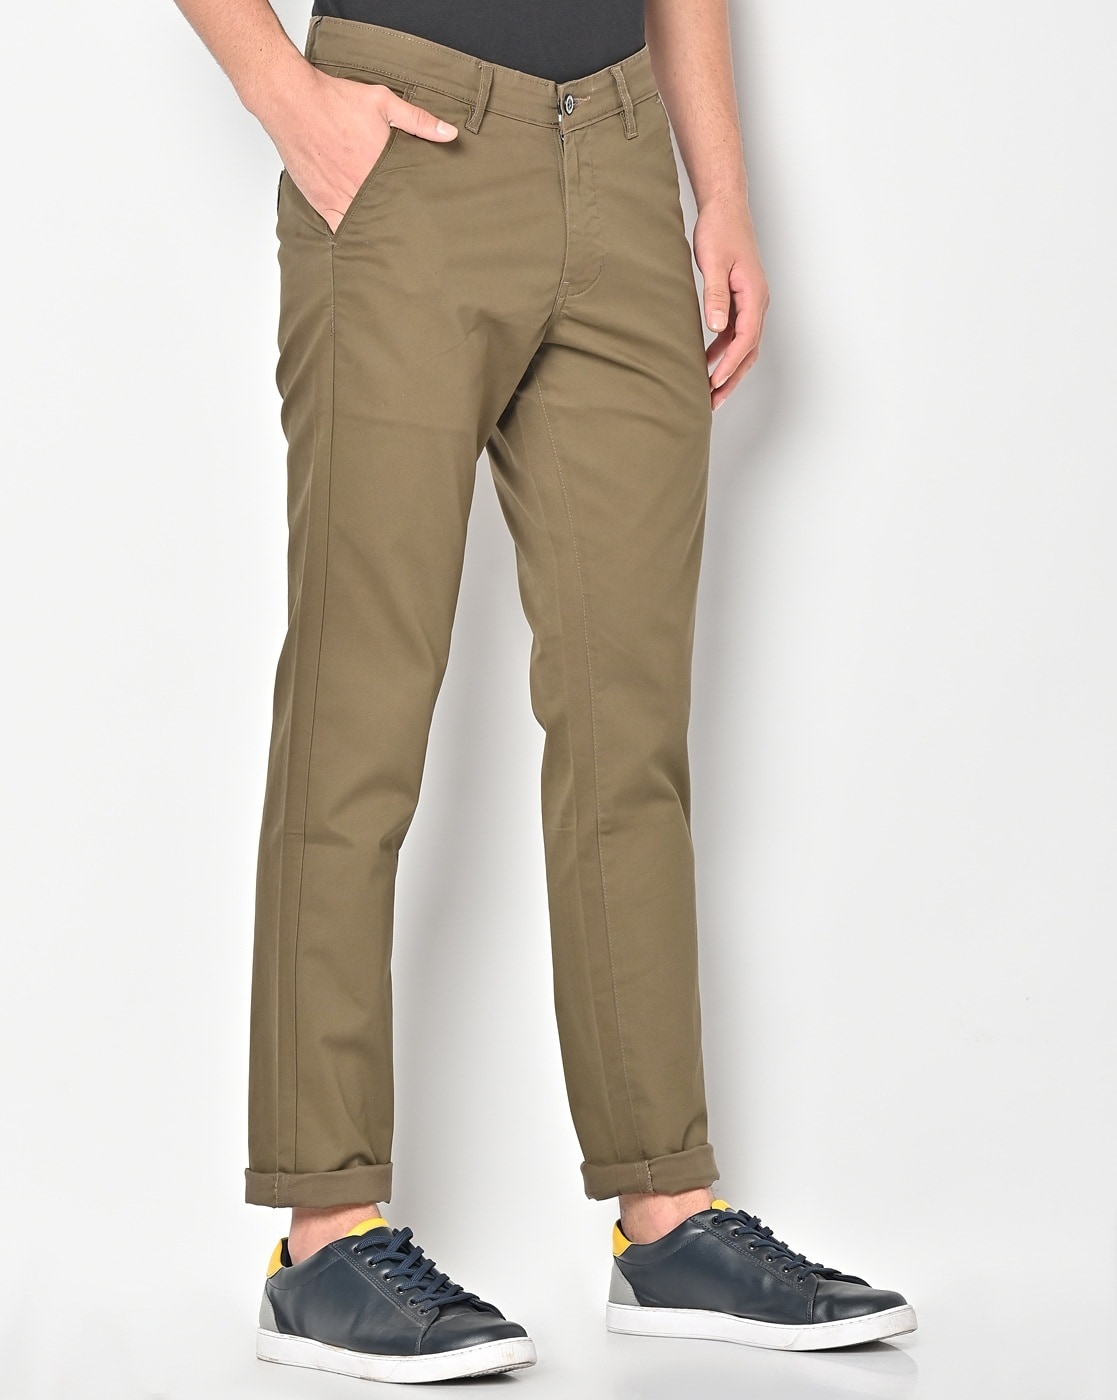 Buy Green Formal Pants Online In India At Best Price Offers | Tata CLiQ